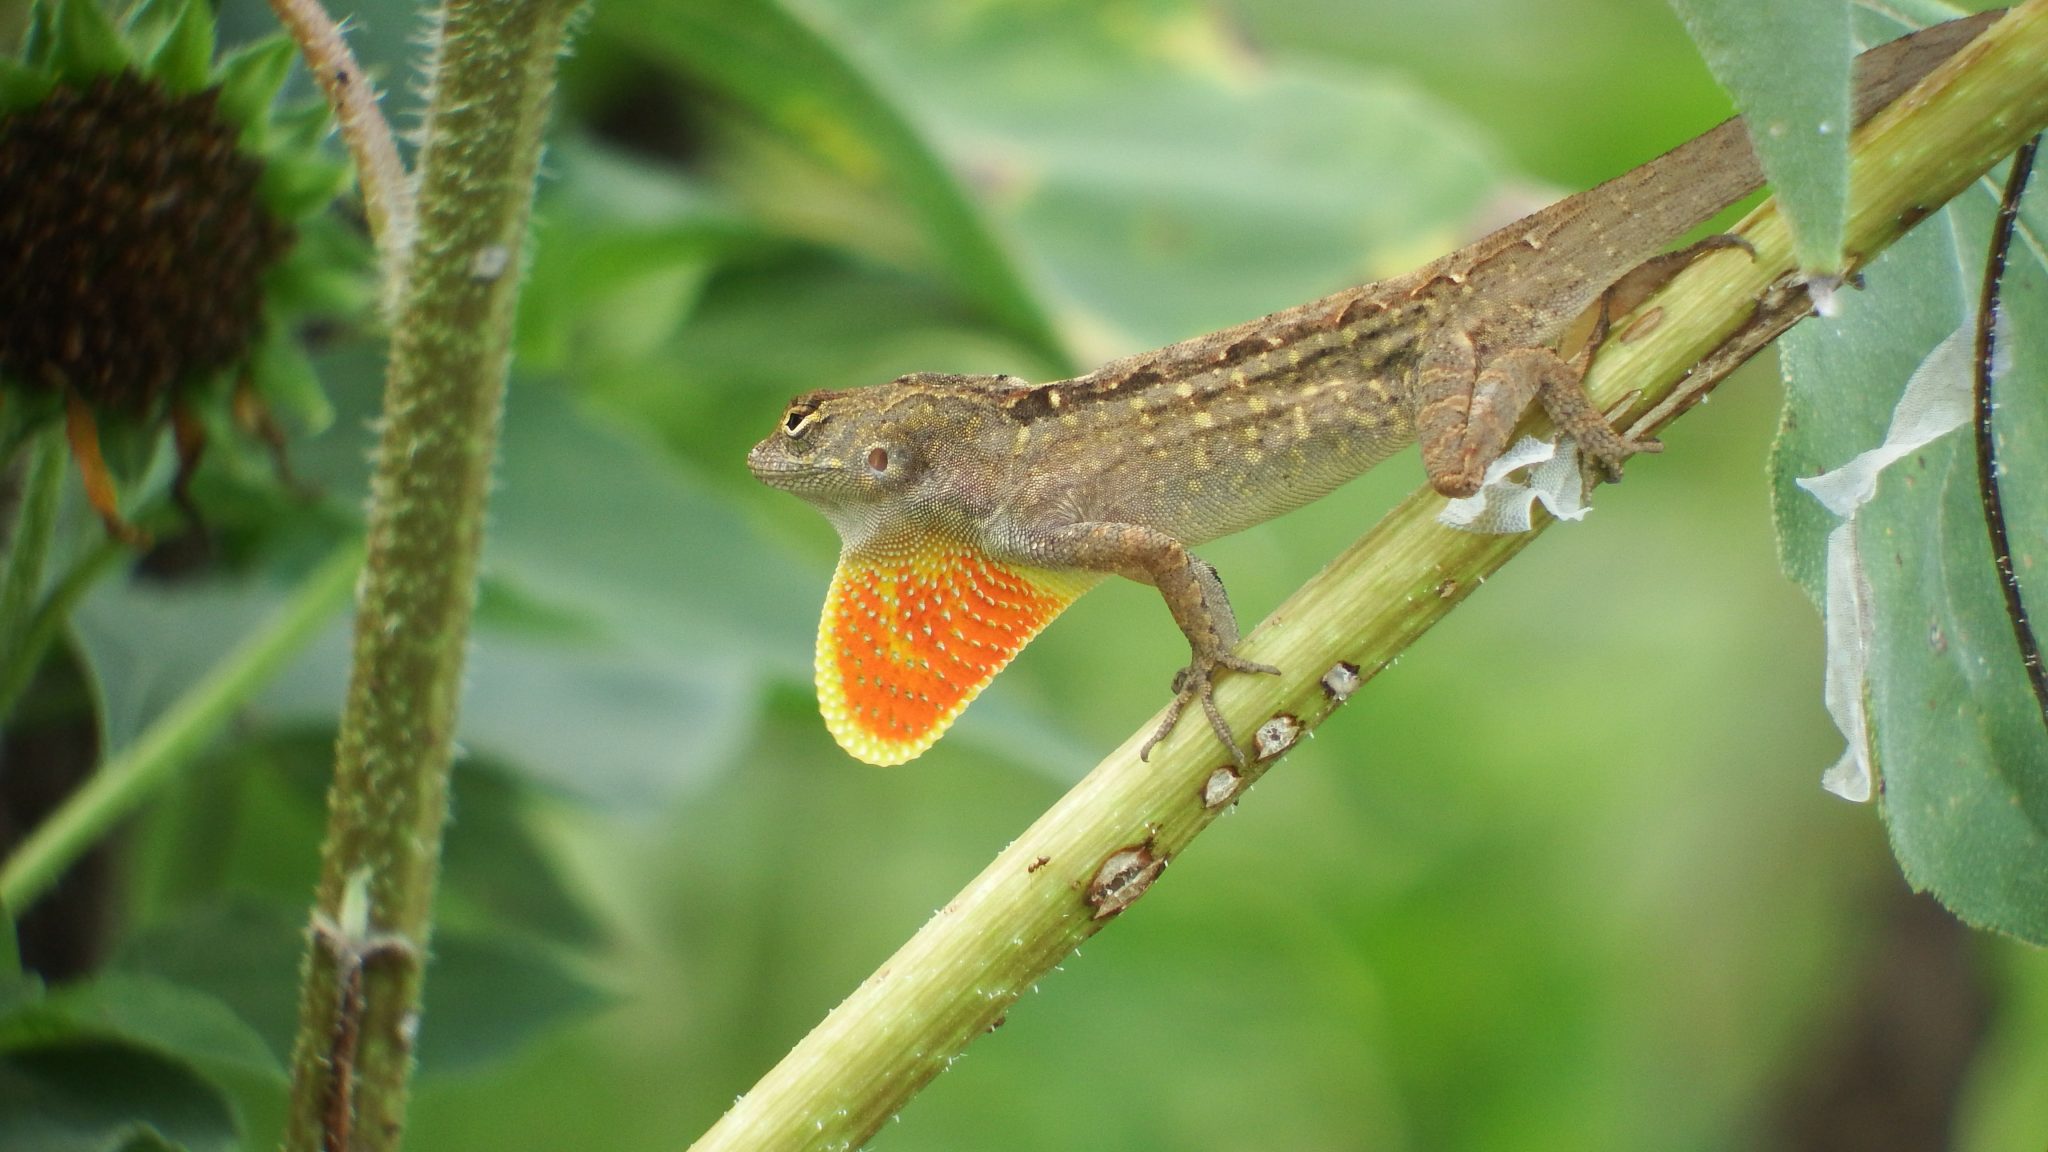 What Do Anole Lizards Eat?